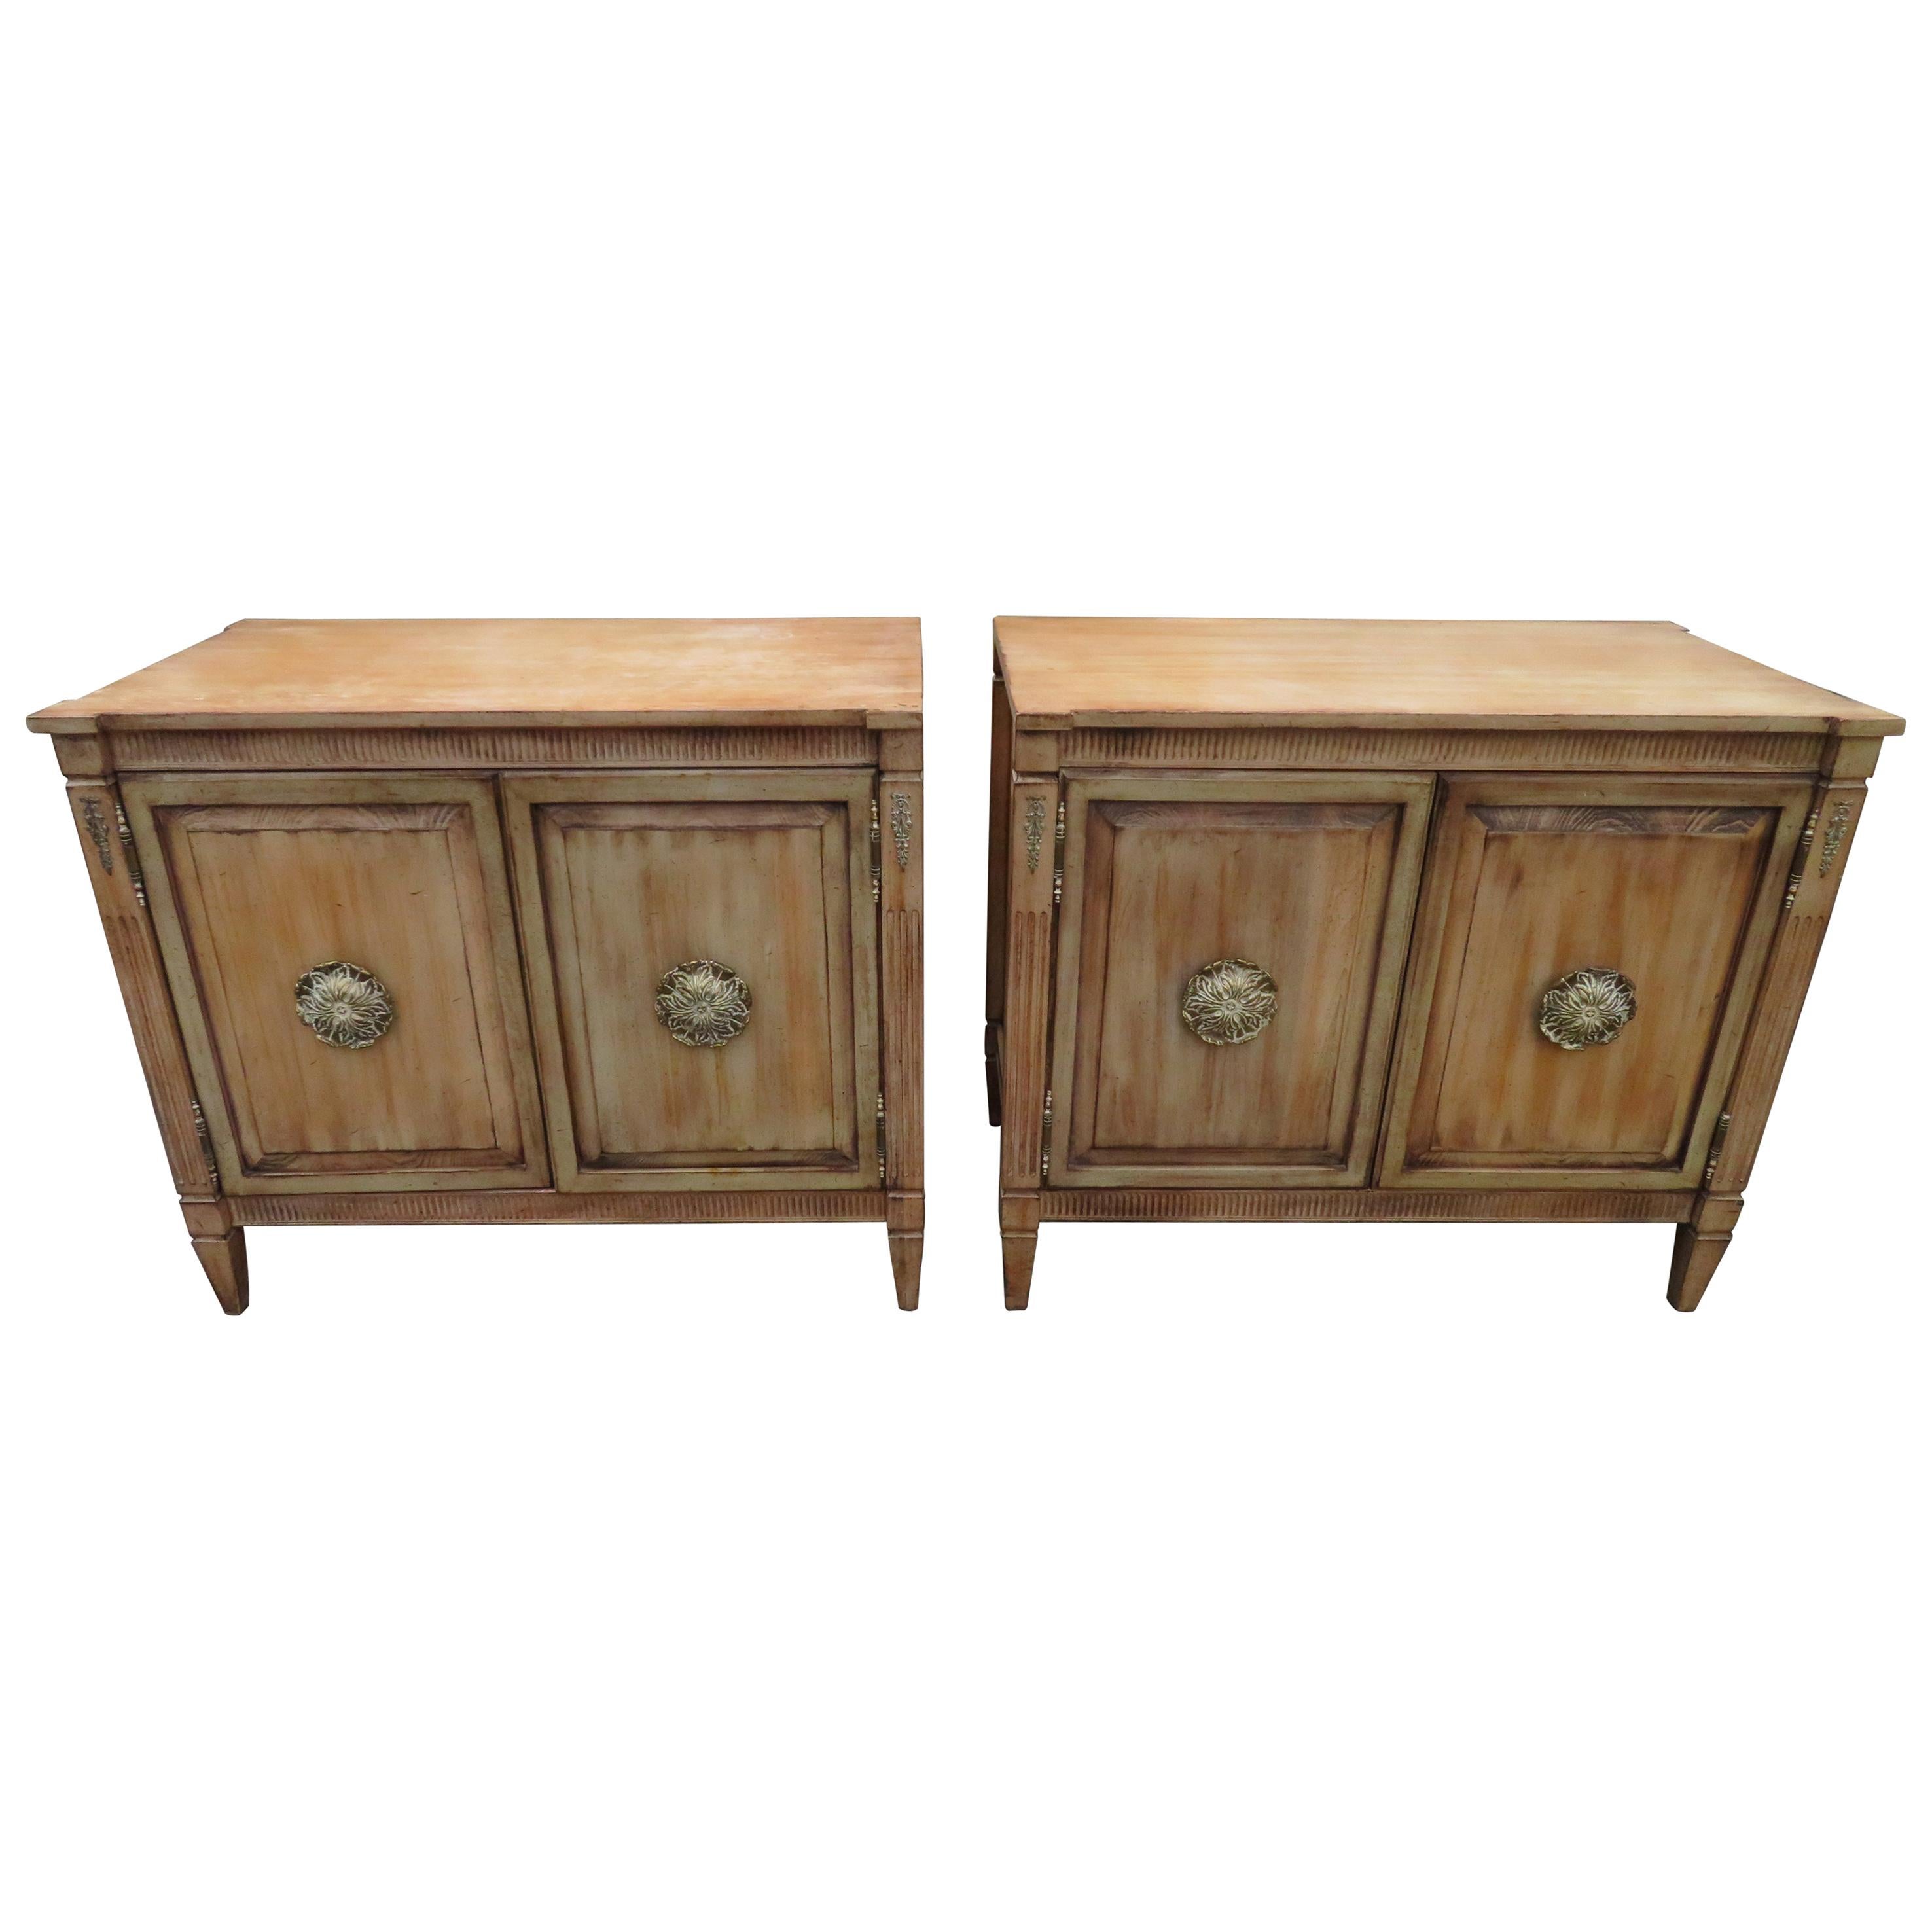 Stunning Pair of Neoclassical Distressed Bachelors Chests Hollywood Regency